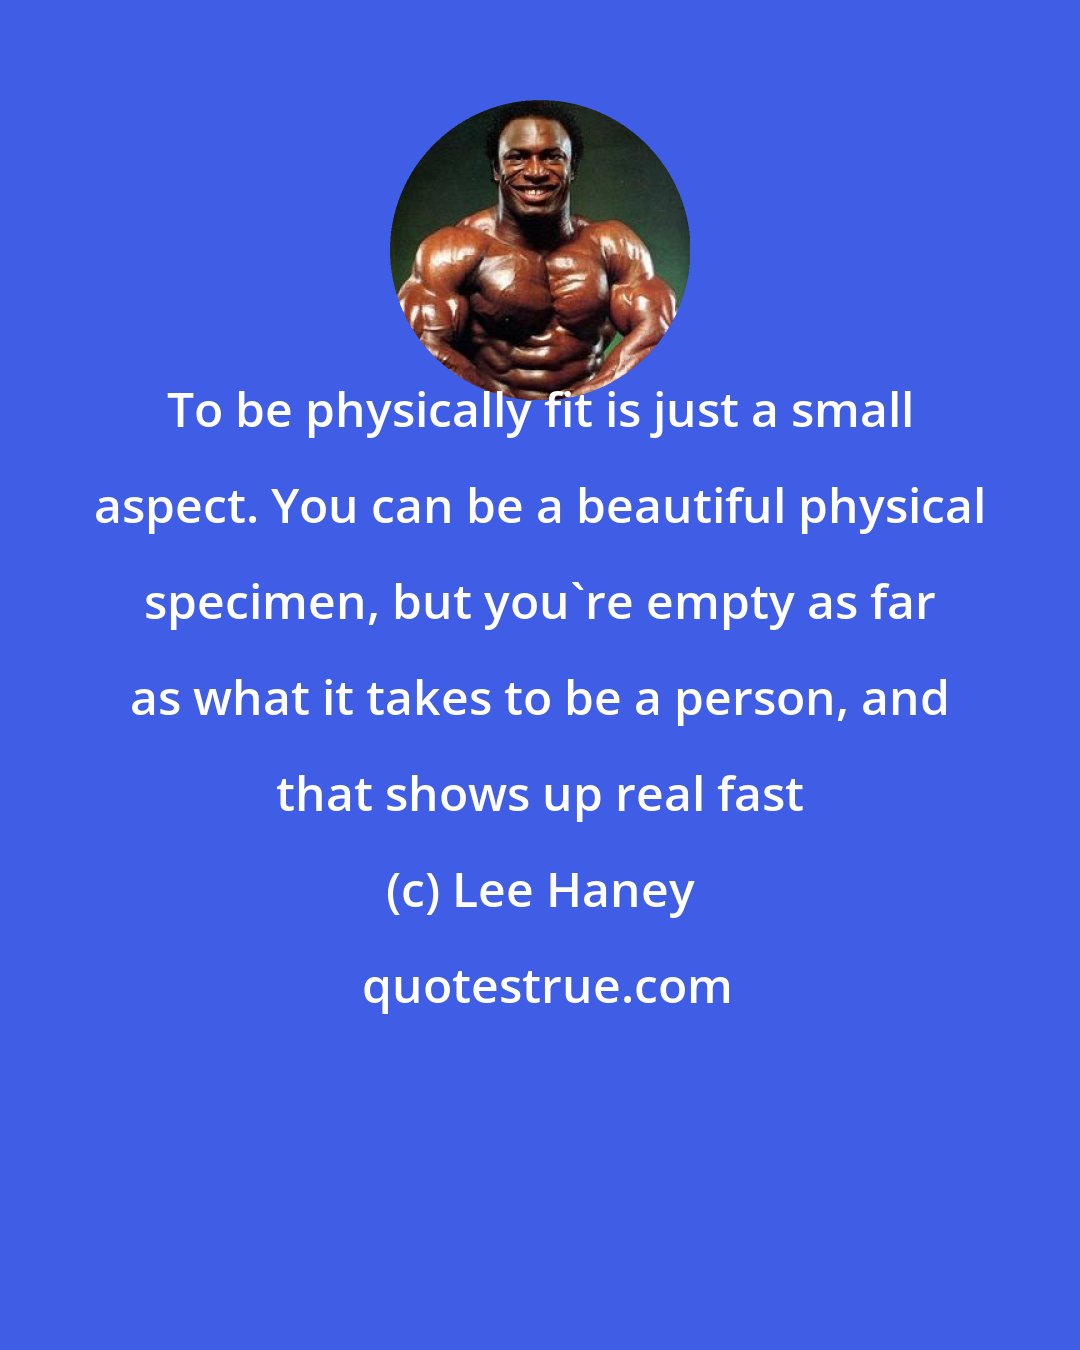 Lee Haney: To be physically fit is just a small aspect. You can be a beautiful physical specimen, but you're empty as far as what it takes to be a person, and that shows up real fast